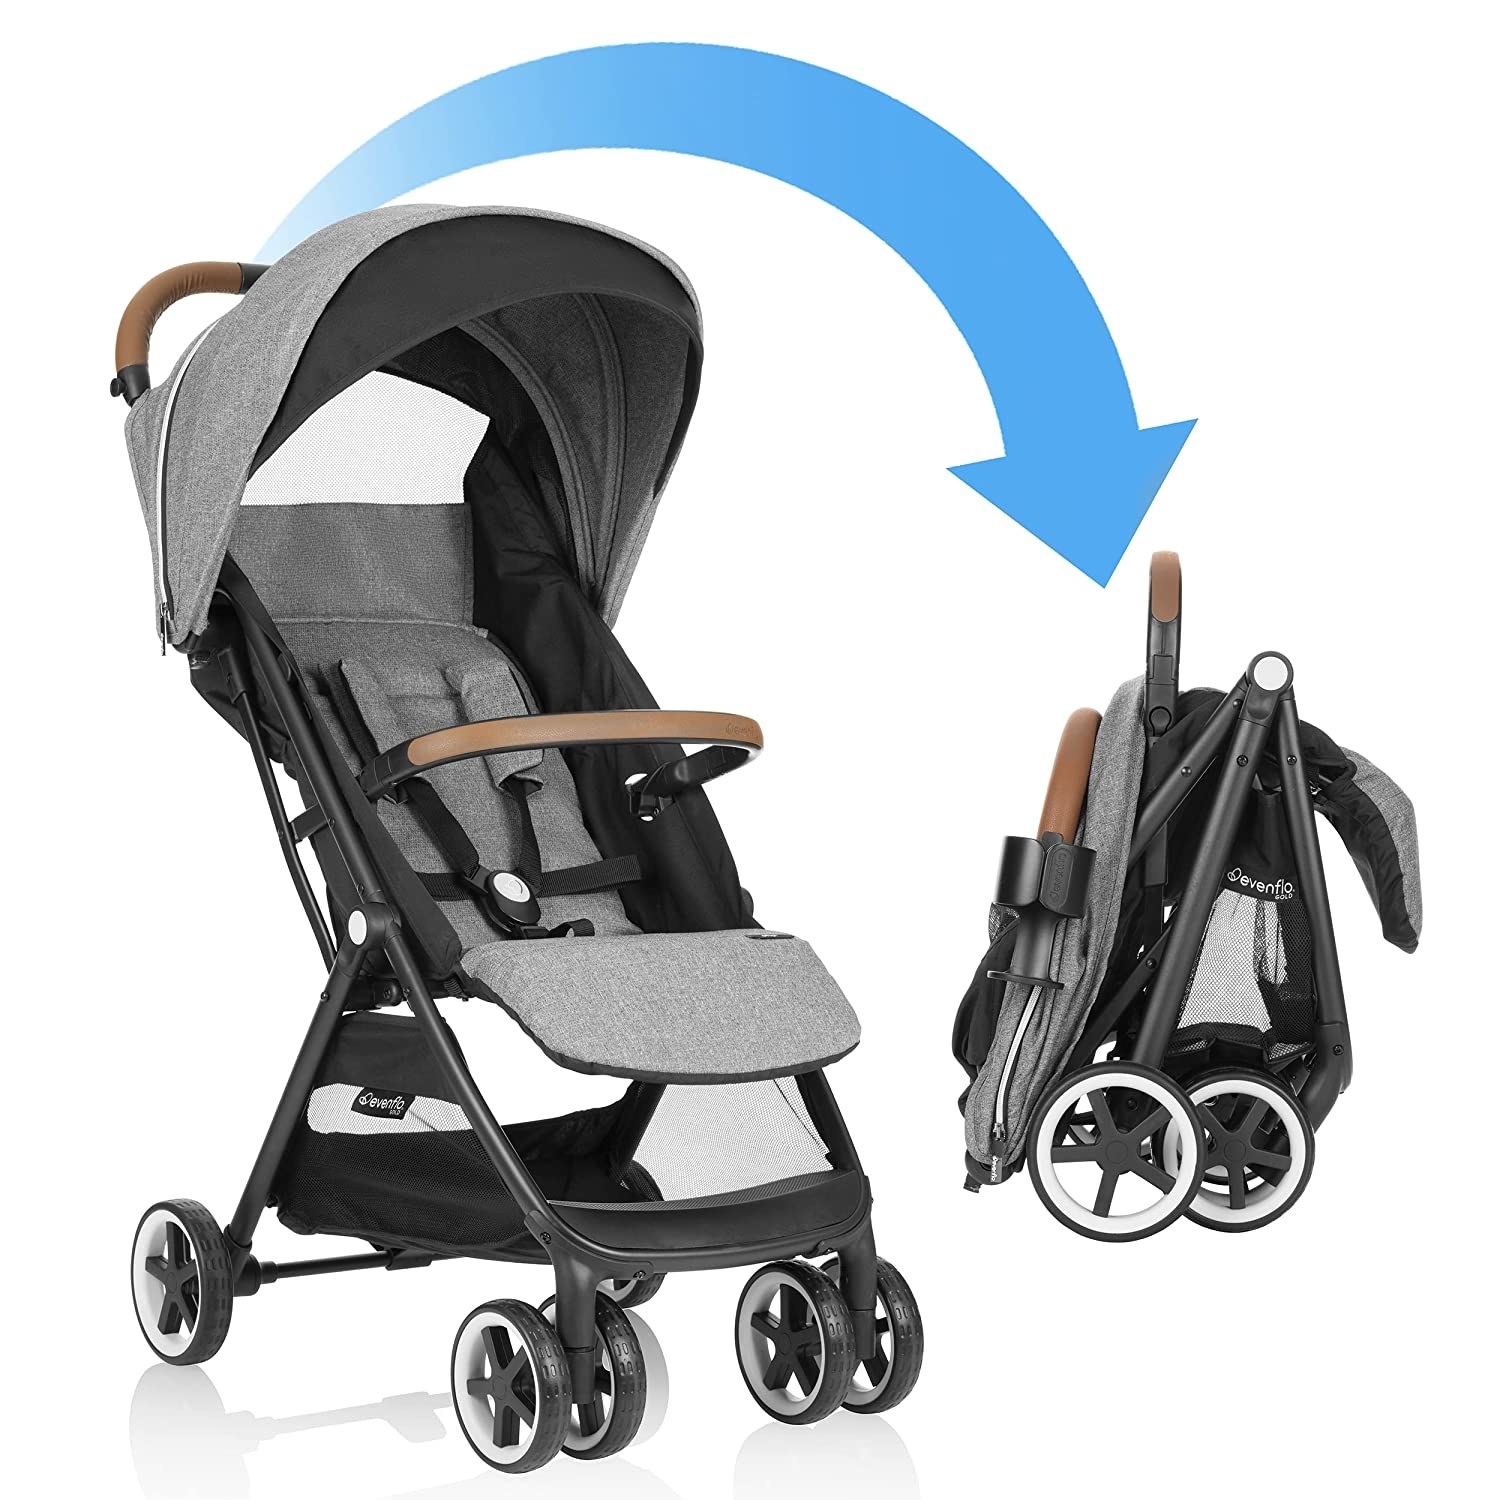 stroller shown like normal and also folded